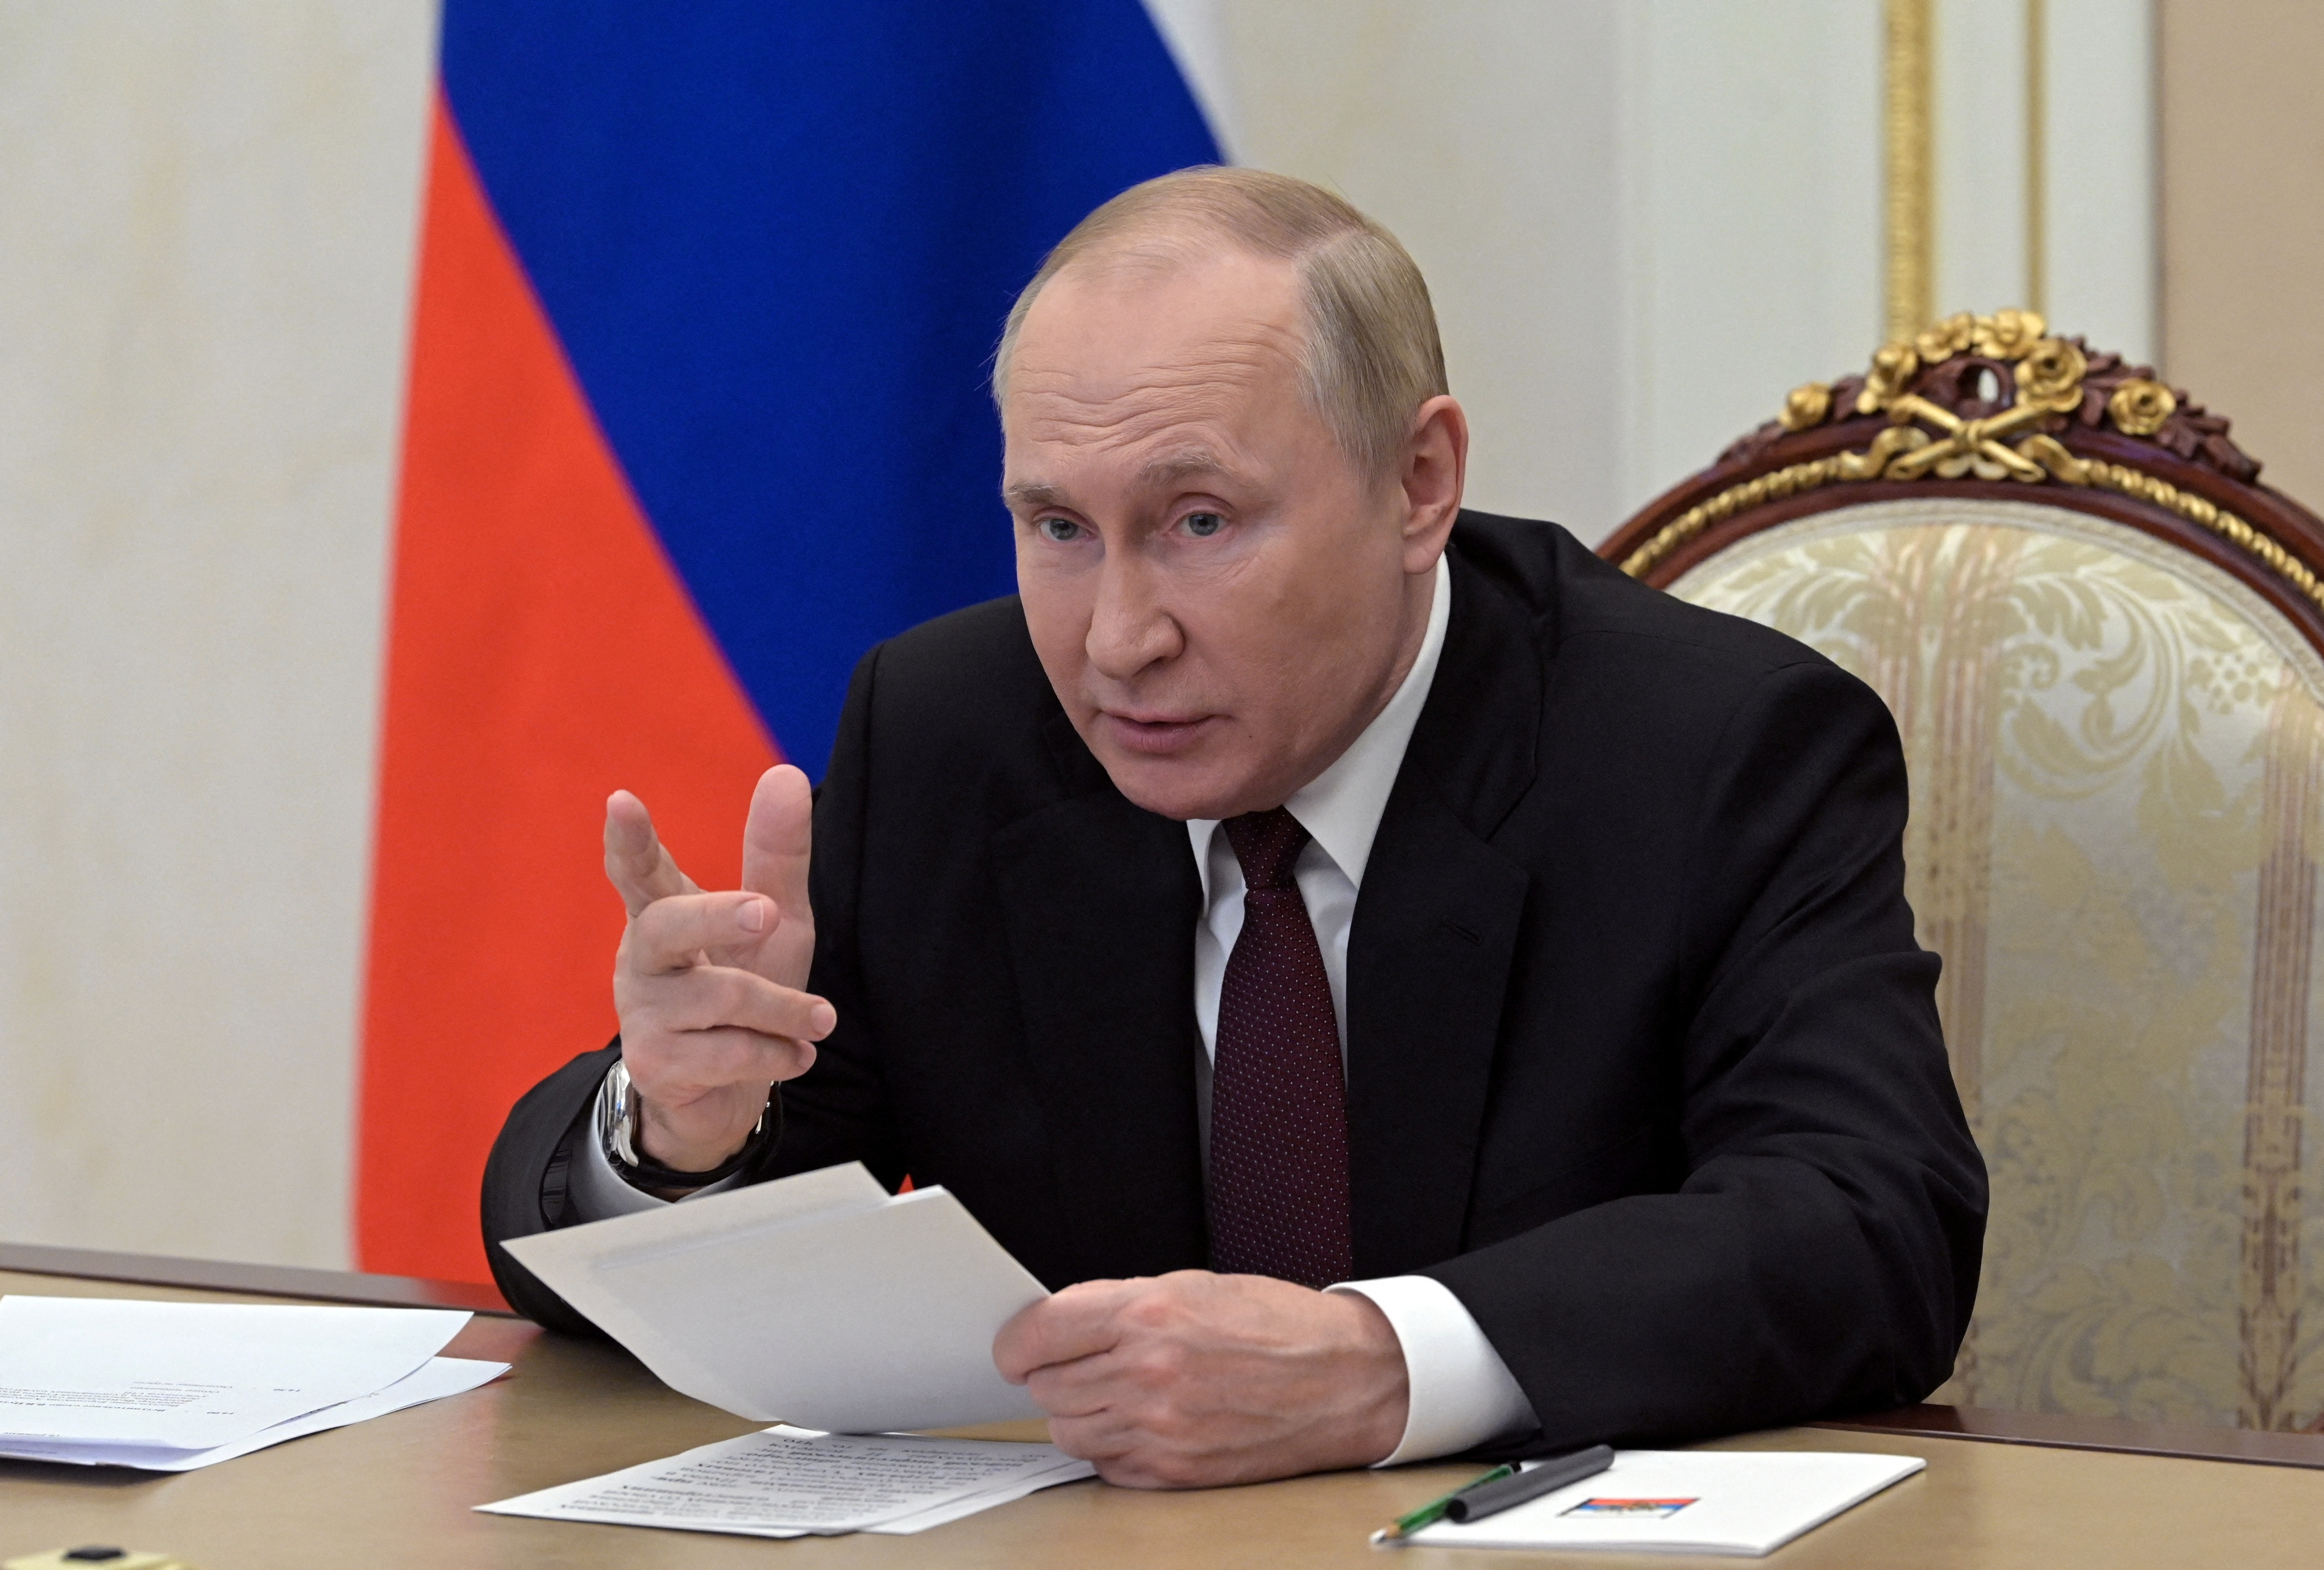 Russian President Vladimir Putin addresses the head of the CIS security agency via video link in Moscow